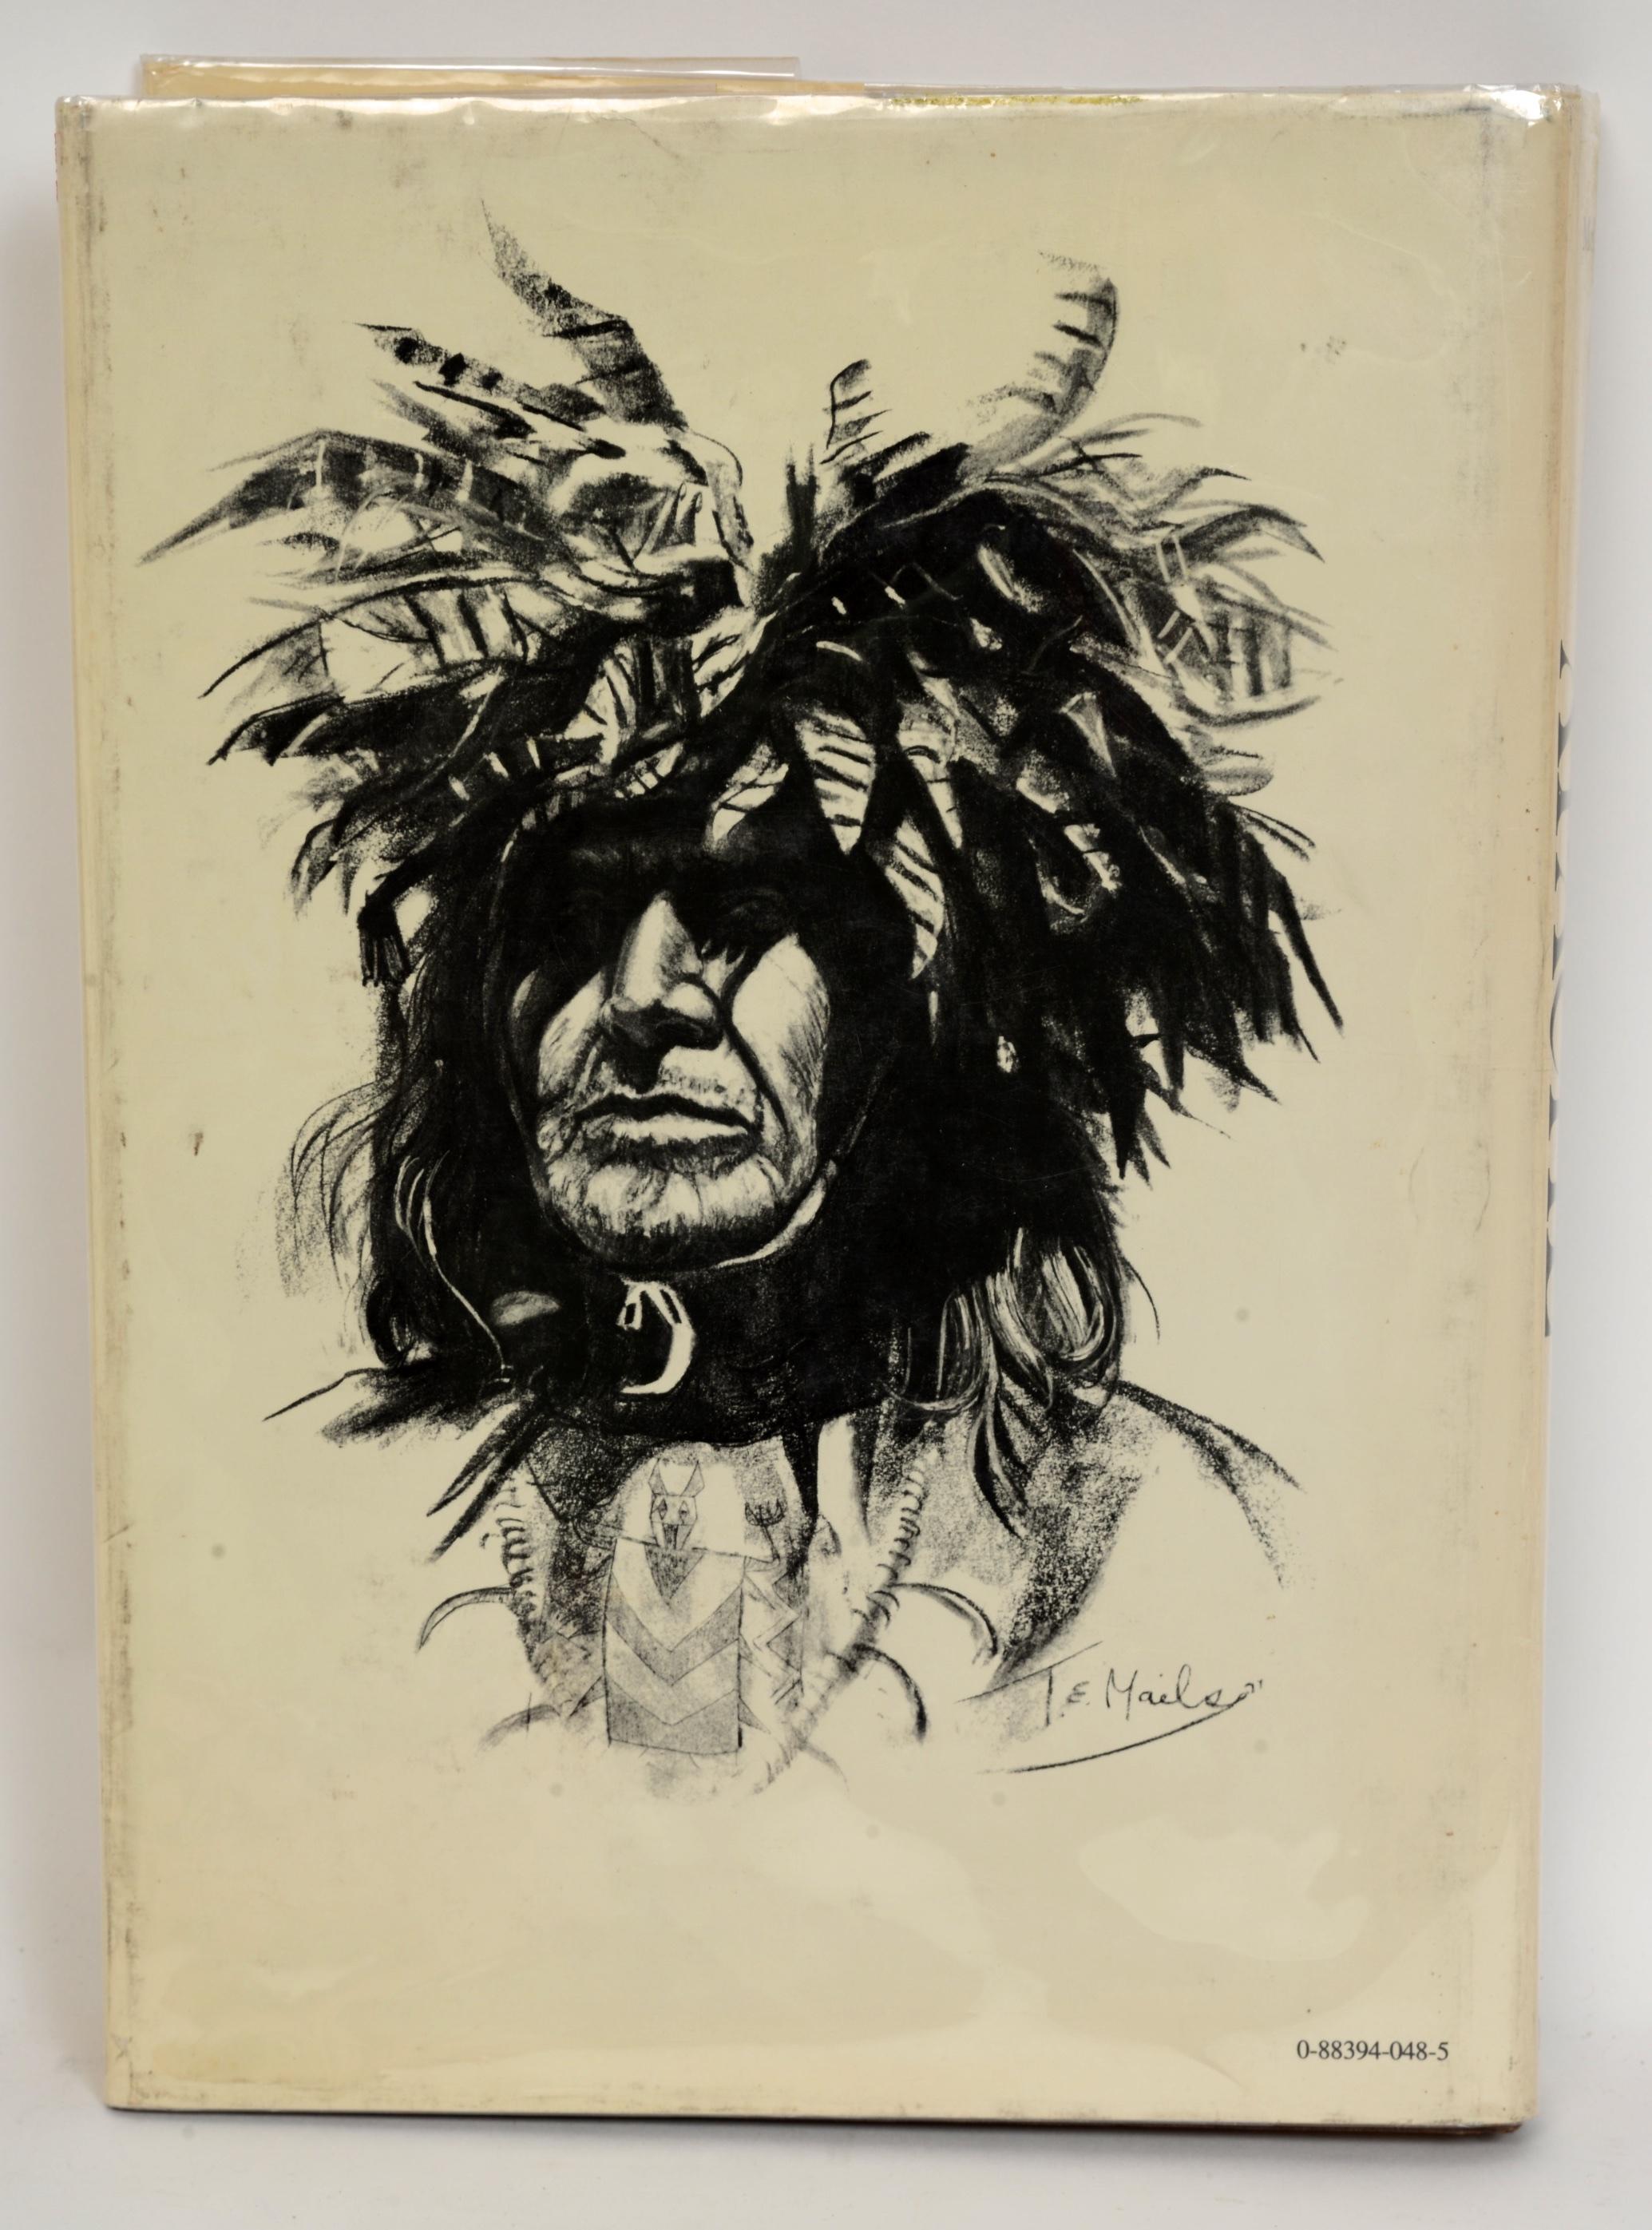 The People Called Apache by Thomas E. Mails. Promontory Press, NY, 1981. Hardback with Gaylord covered dust jacket. 447 pp, b&w photos and illustrations throughout. They call themselves 